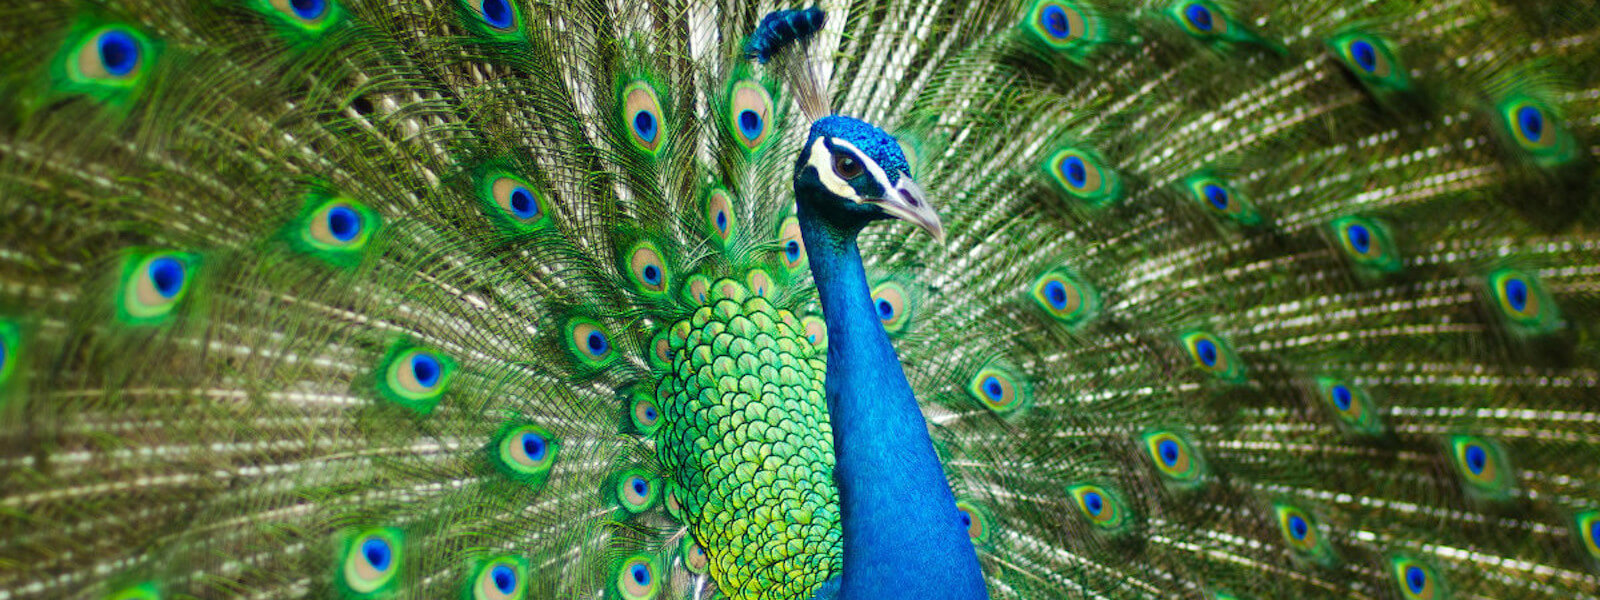 Peacock spreading his tail feathers